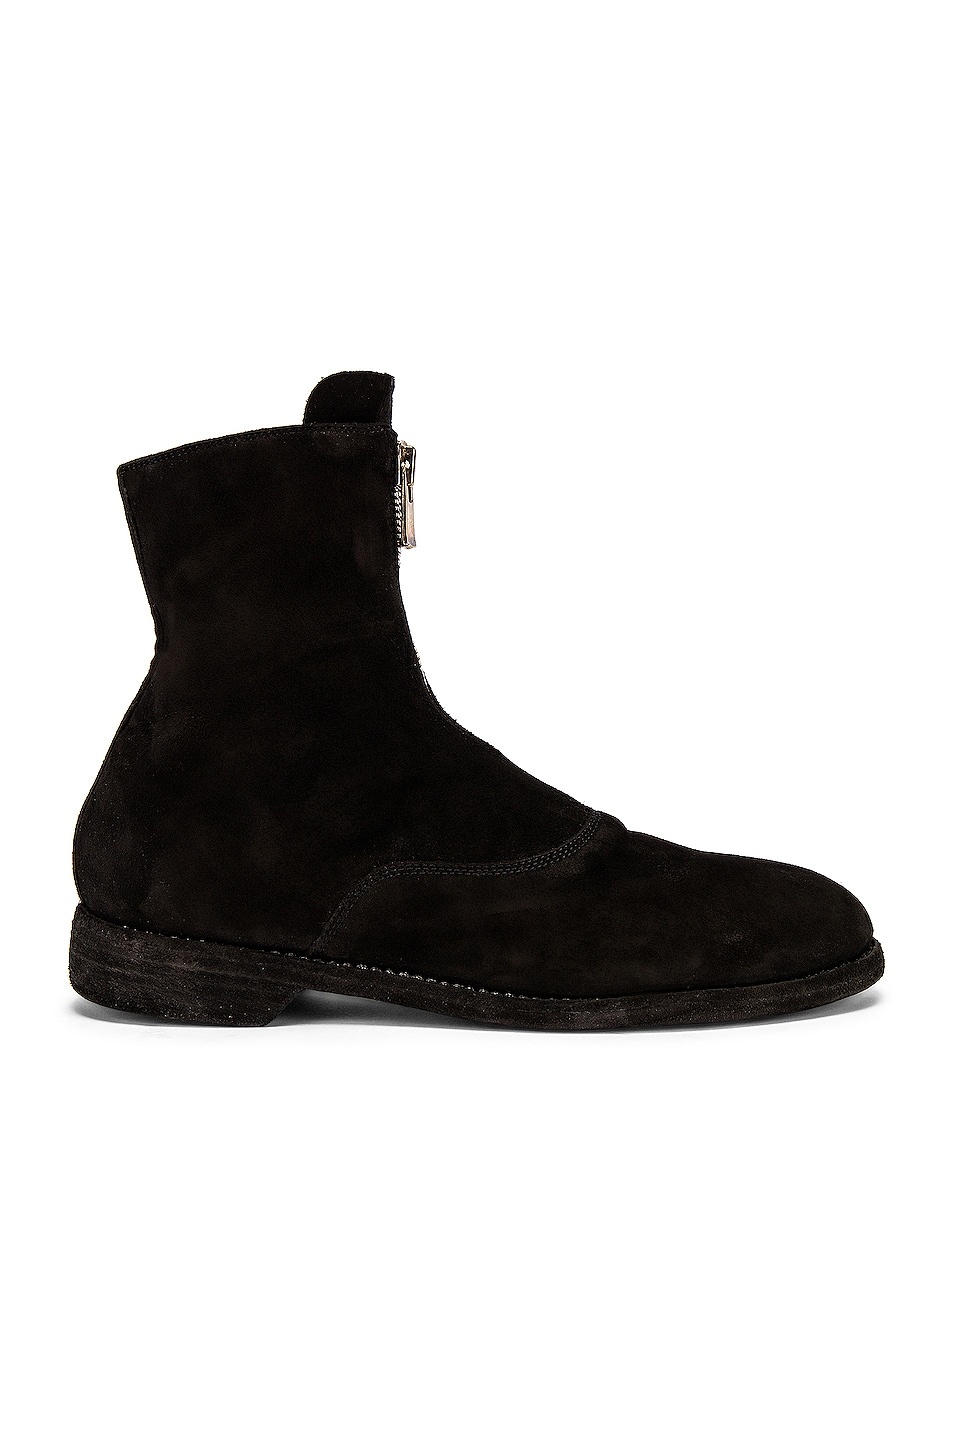 Stag Suede Zipper Boots - 1